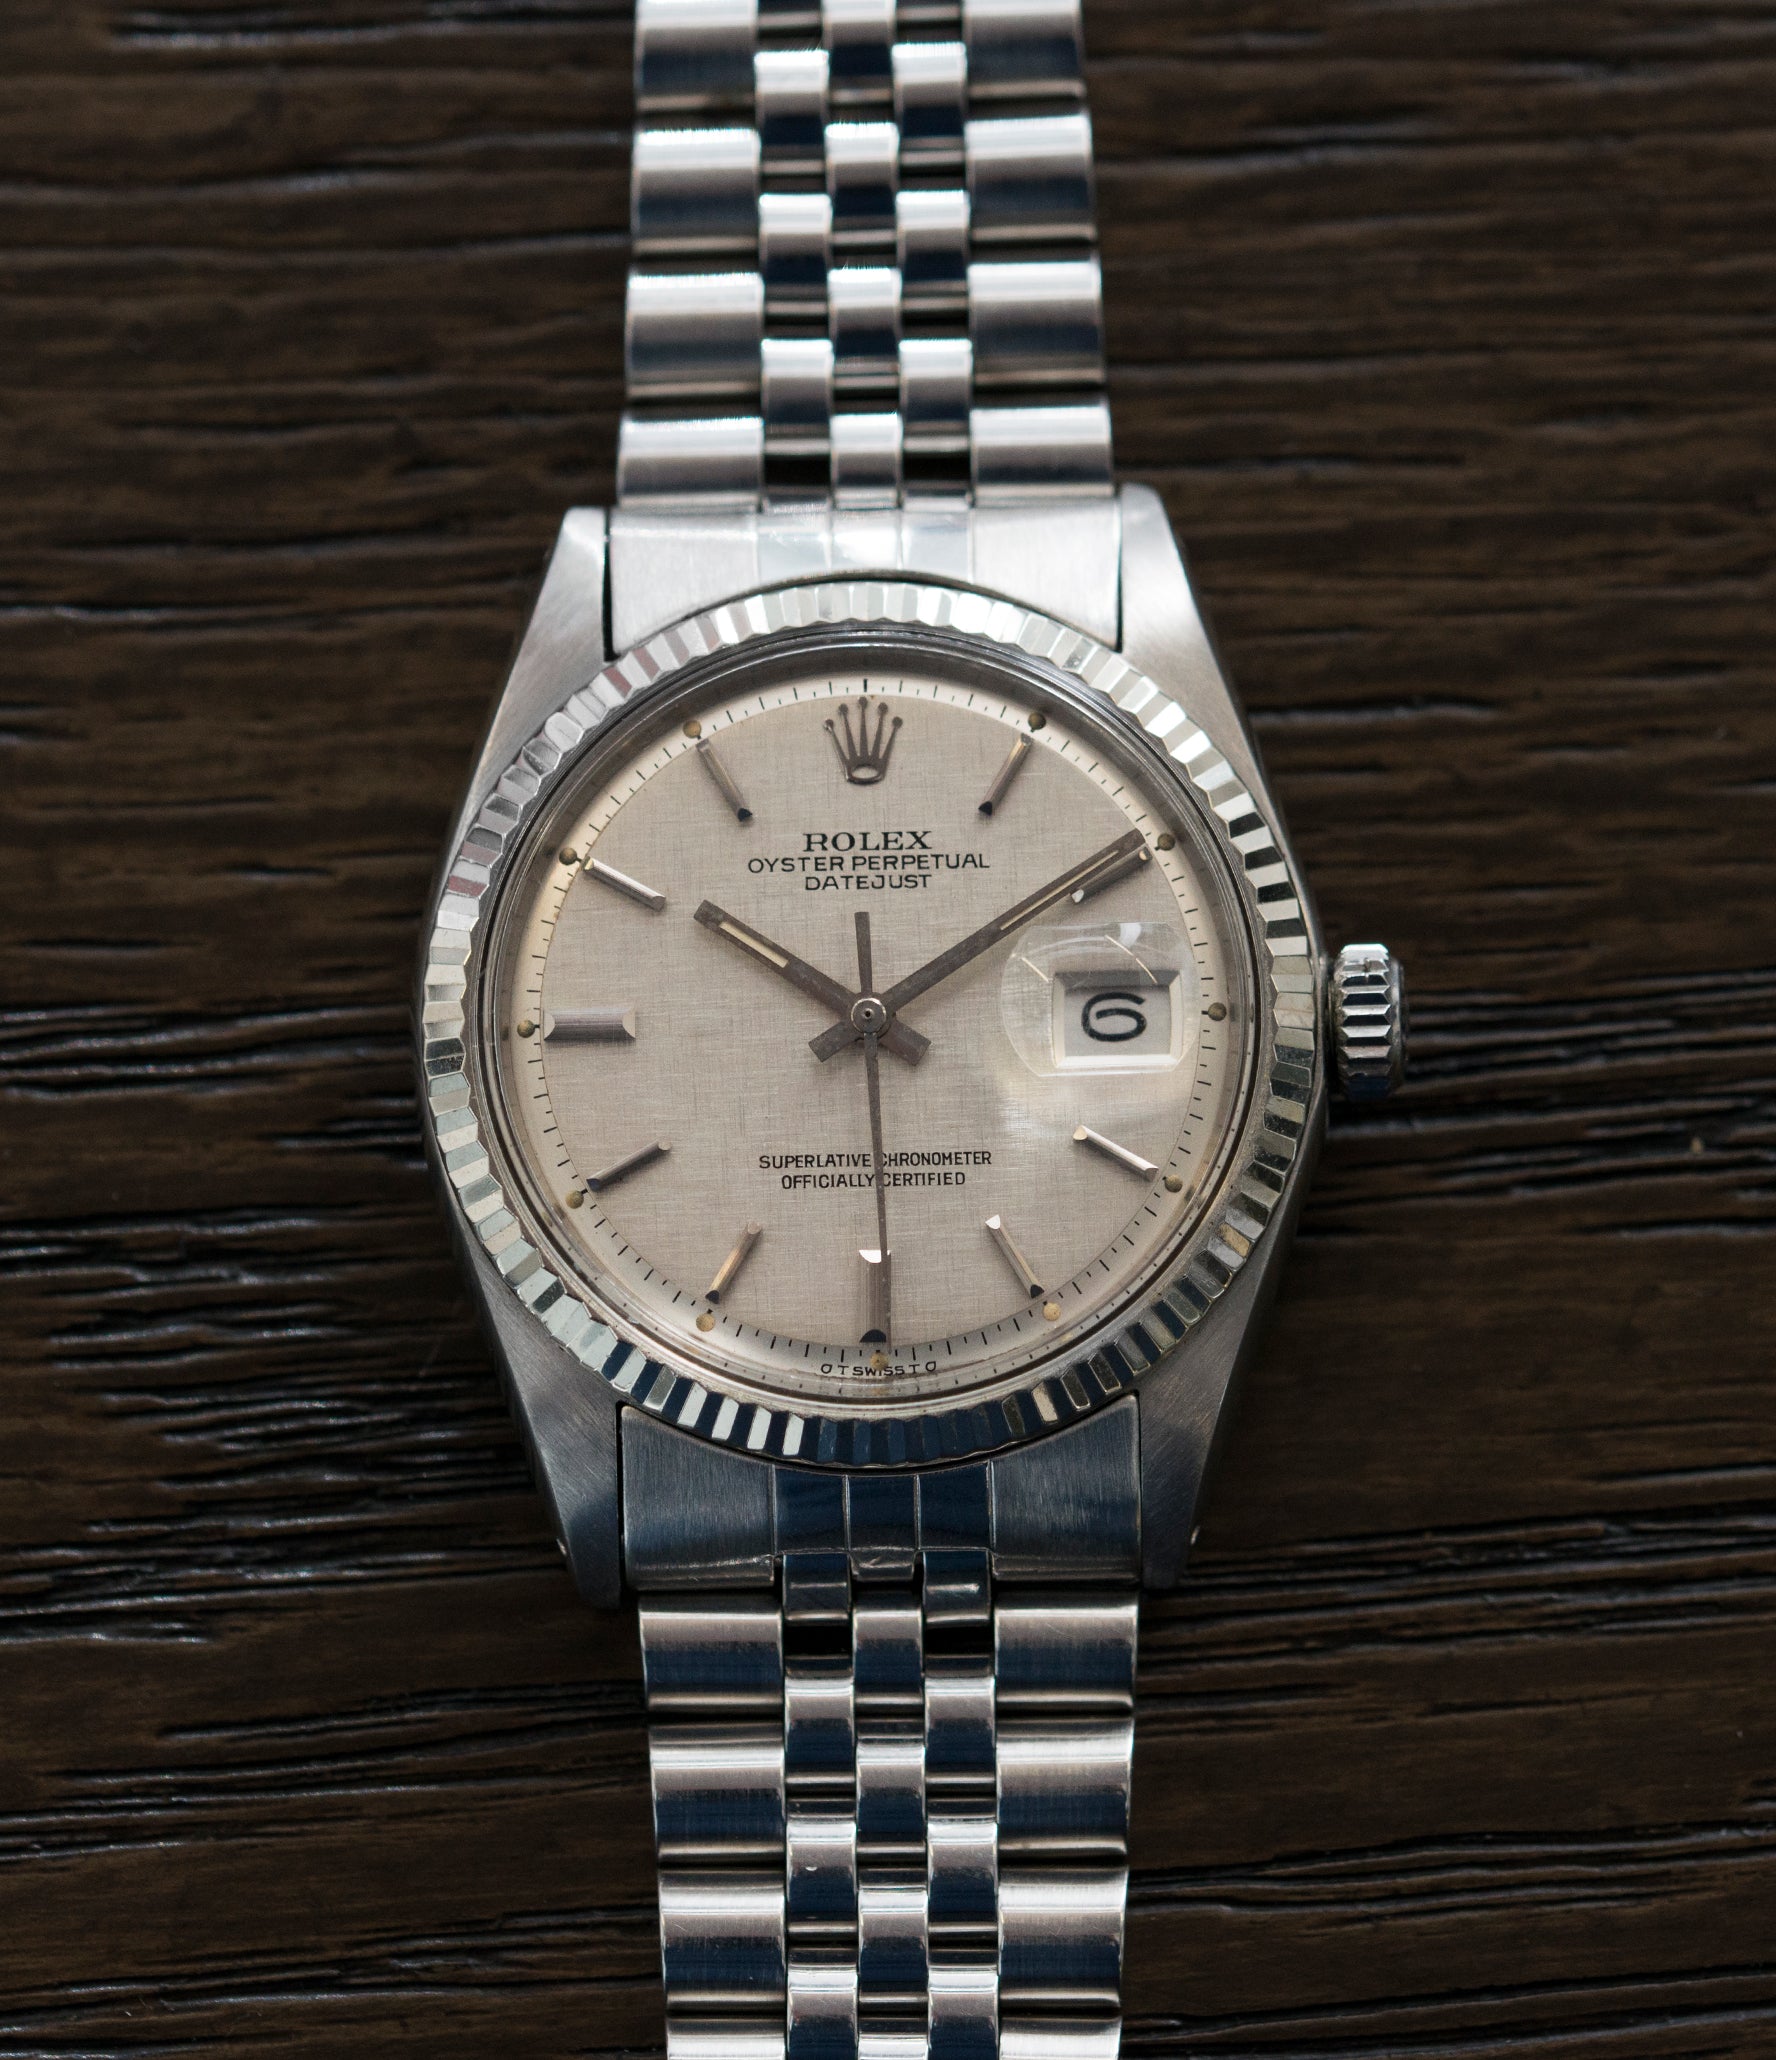 rolex watch oyster perpetual datejust superlative chronometer officially certified